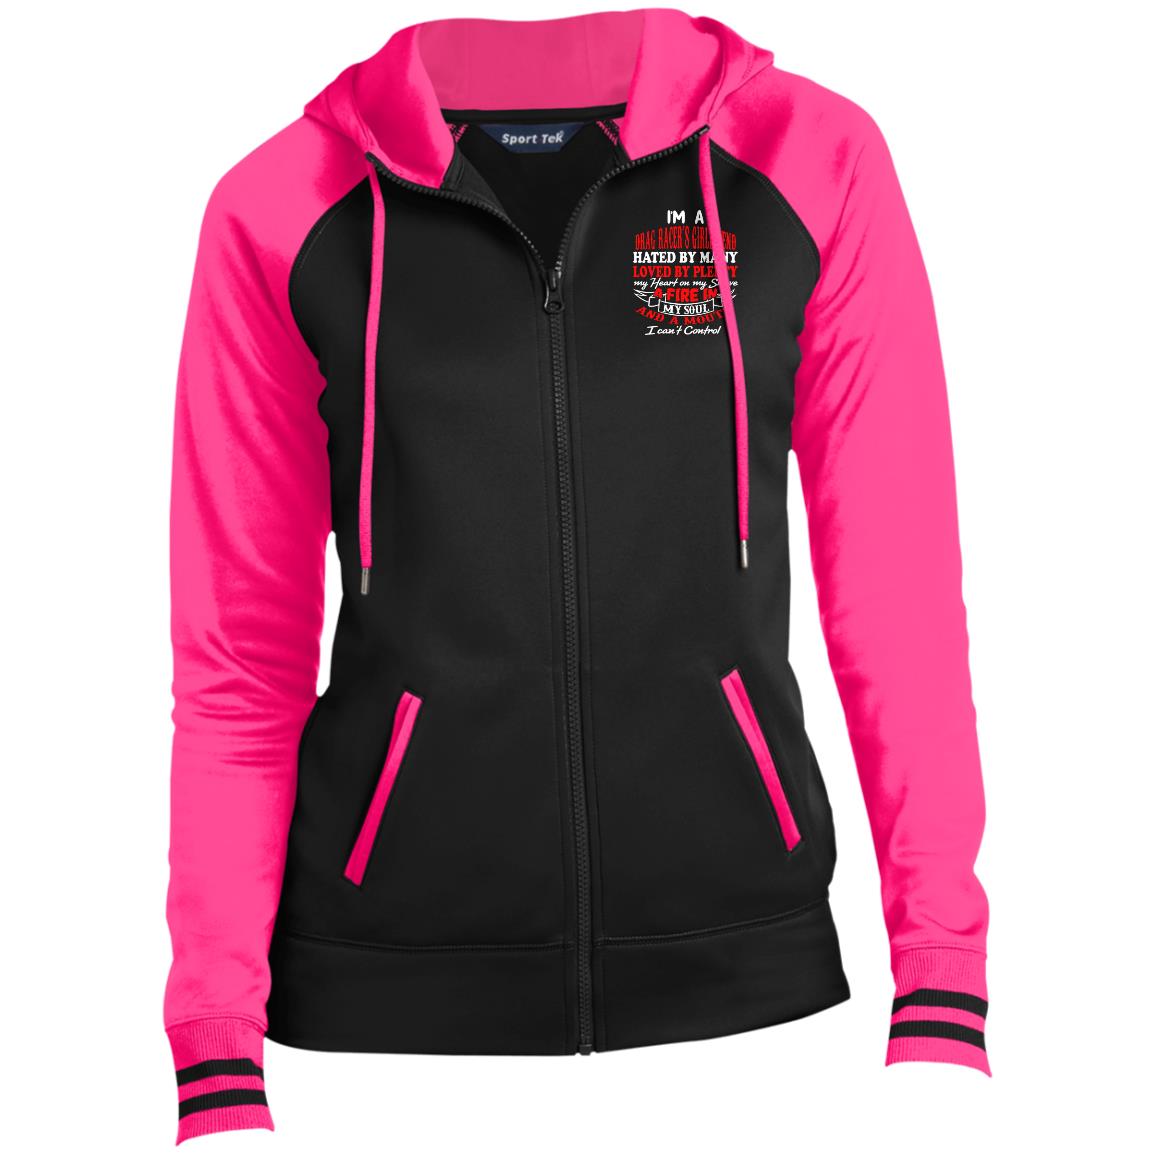 I'm A Drag Racer's Girlfriend Hated By Many Loved By Plenty Ladies' Sport-Wick® Full-Zip Hooded Jacket